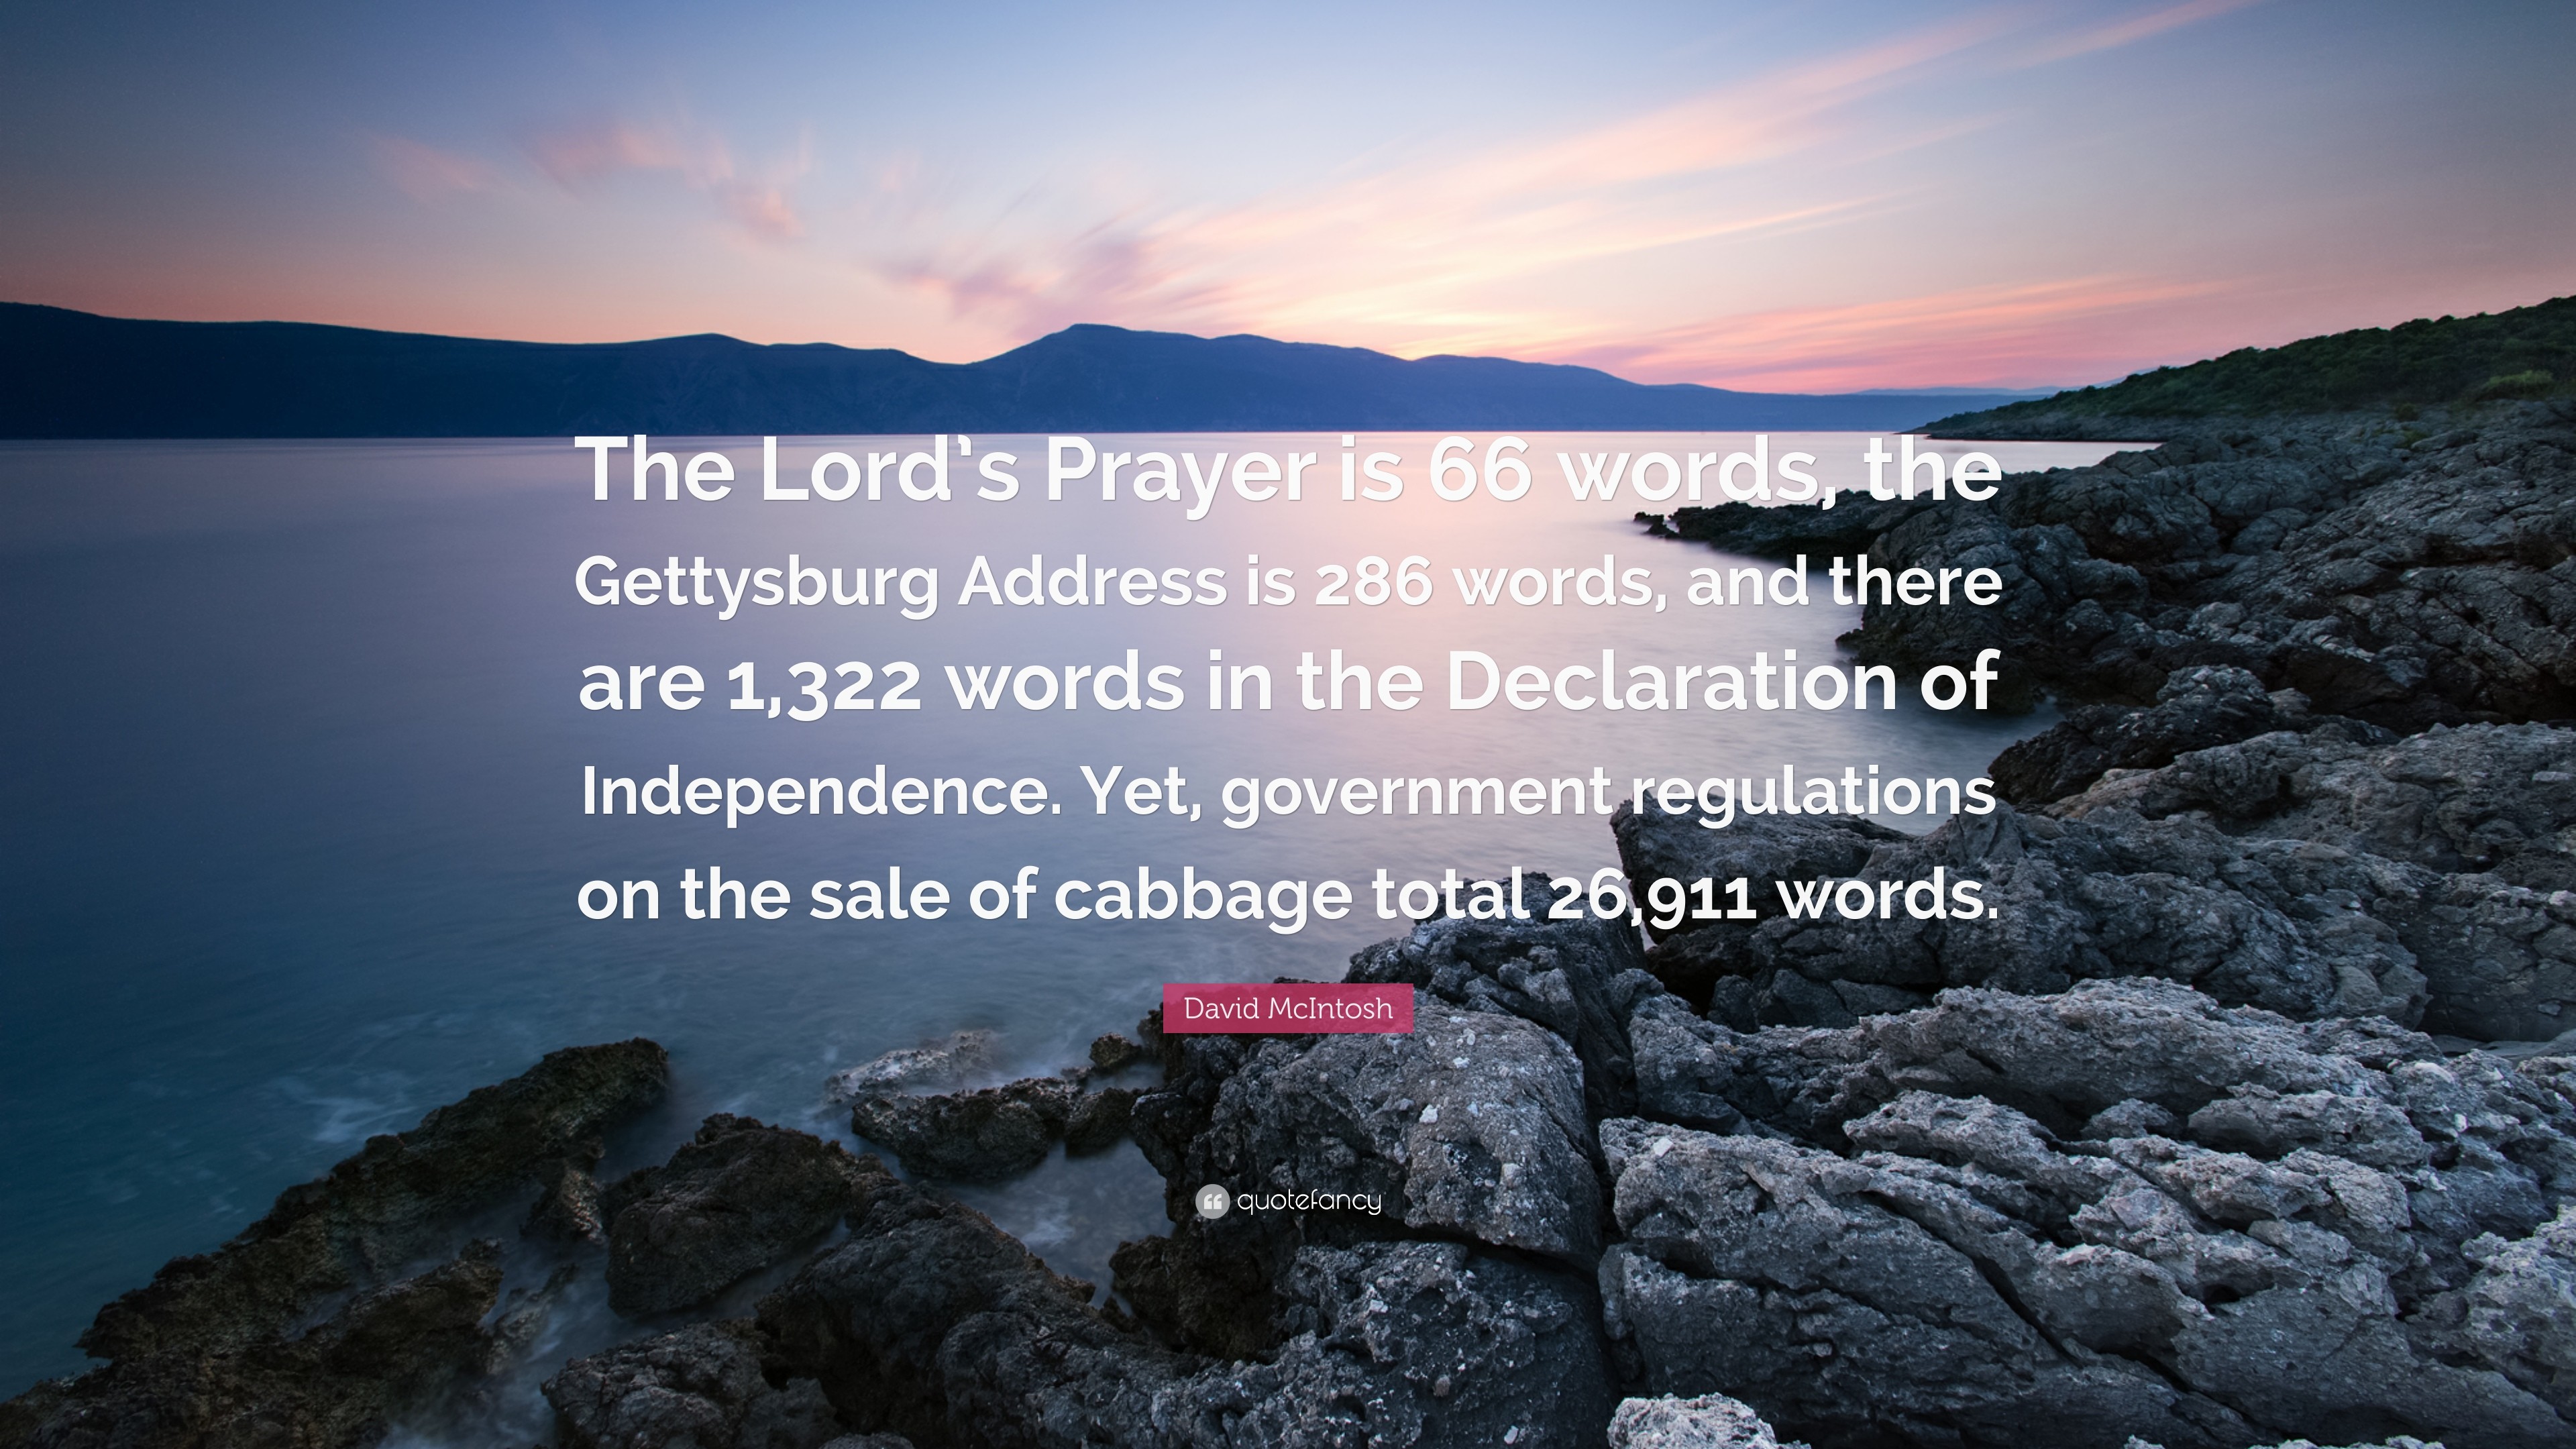 3840x2160 David McIntosh Quote: “The Lord's Prayer is 66 words, the Gettysburg  Address is